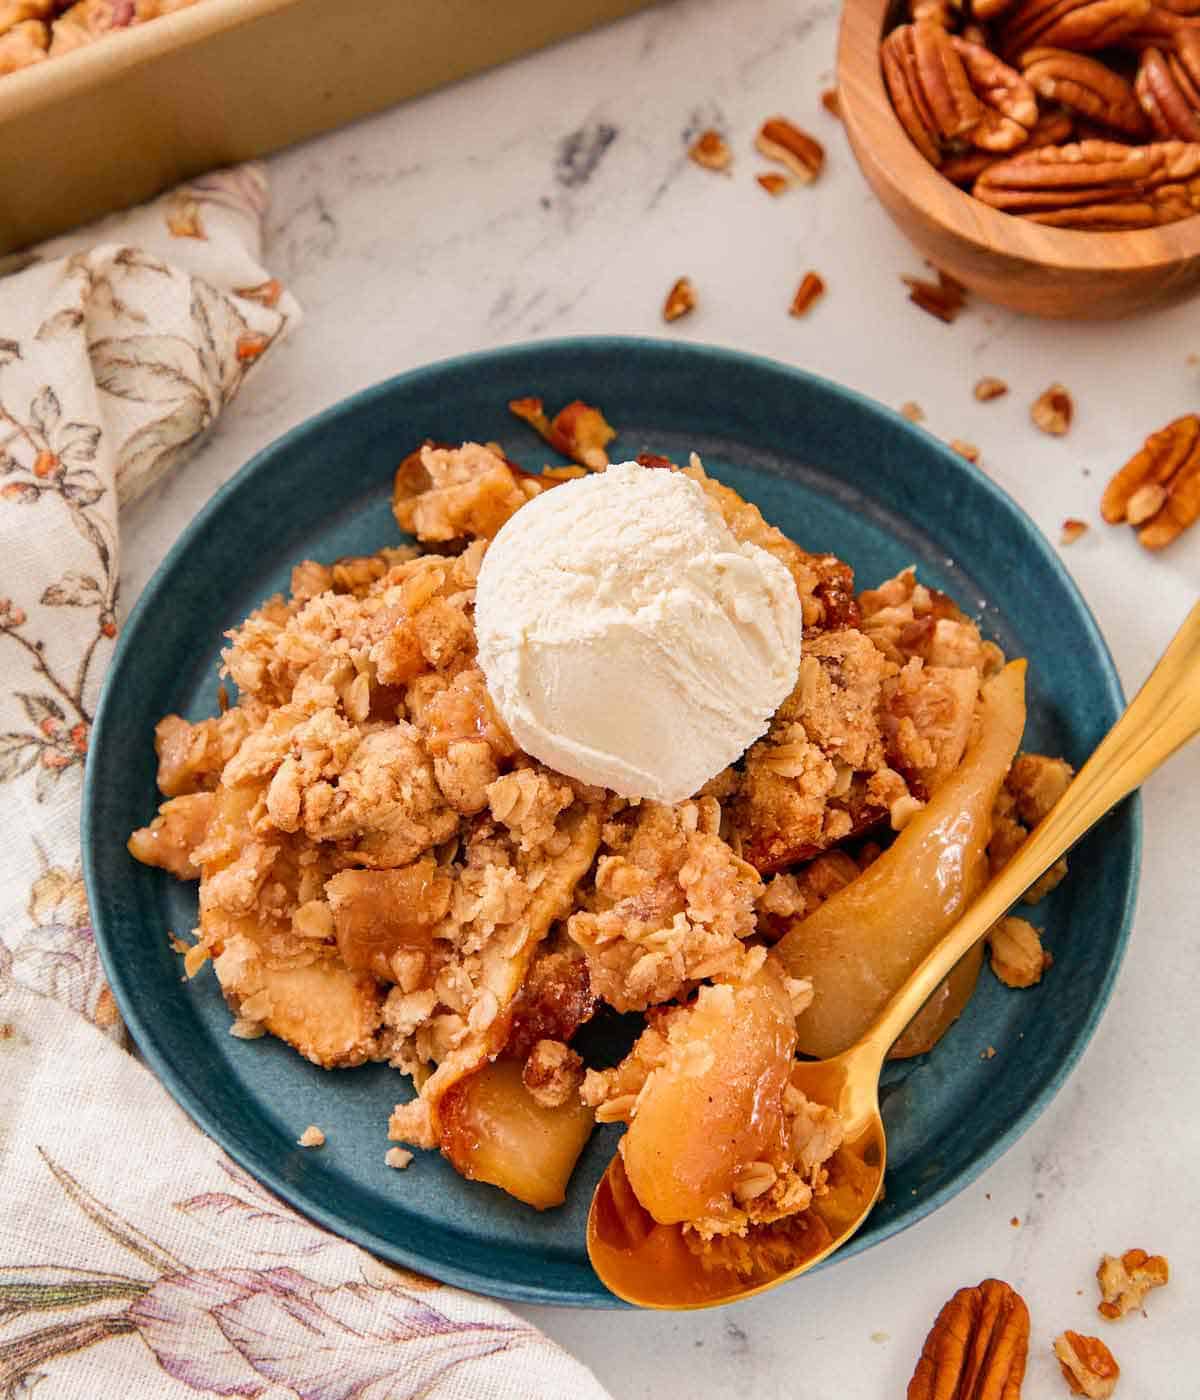 A blue plate with a serving of pear crisp with a scoop of ice cream on top and a spoon by it.